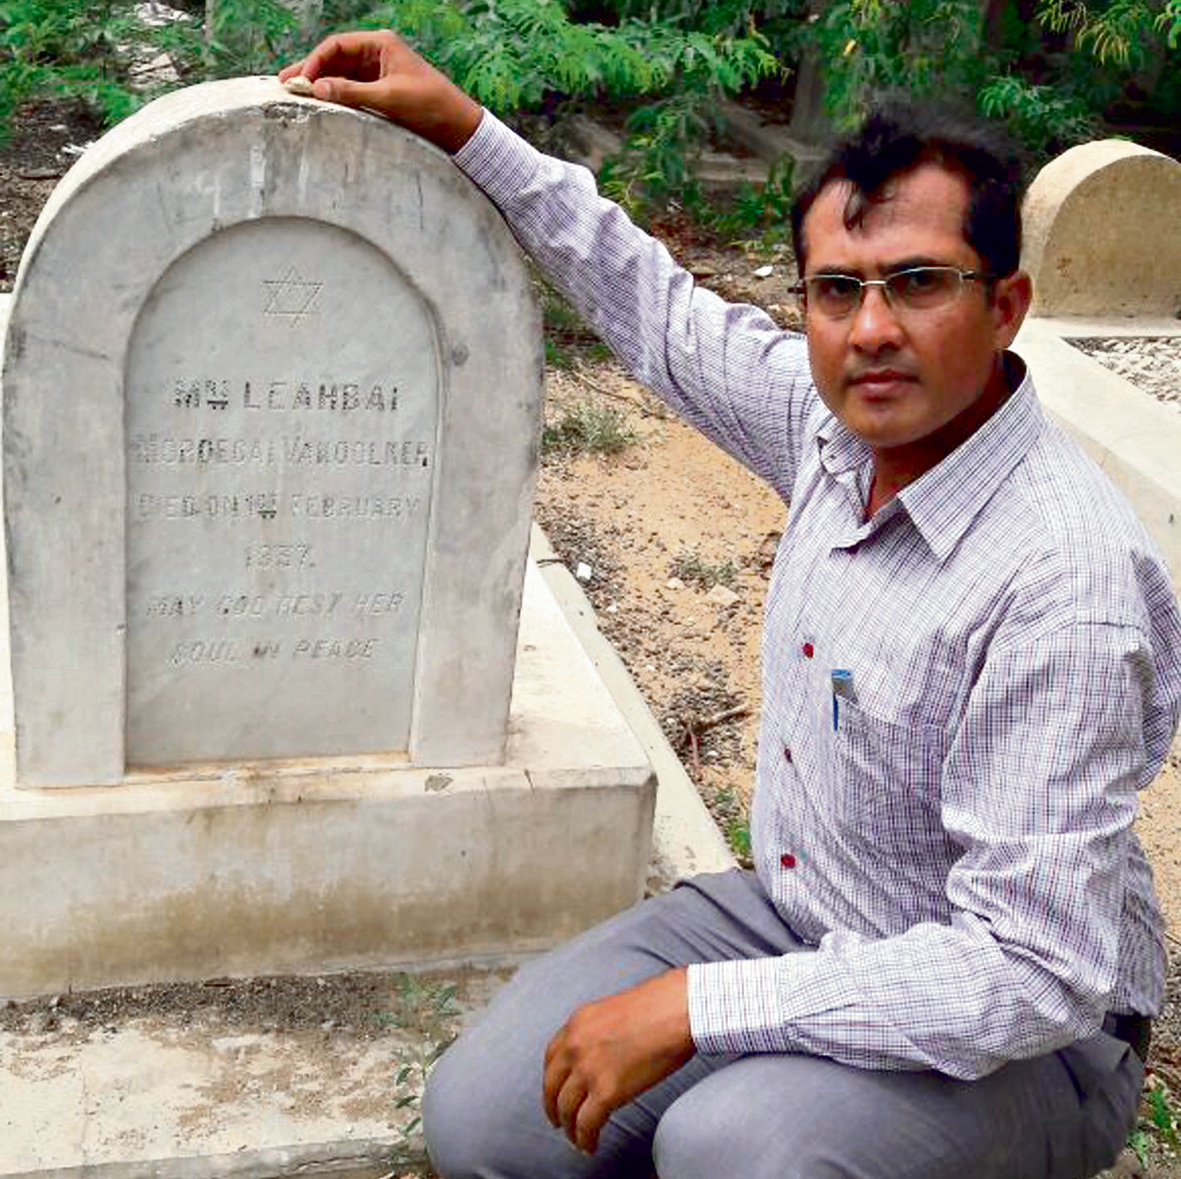 Fishel Benkhald at the Jewish cemetery in Karachi. ‘Just like people come out of the closet in the LGBT community, I felt like I had come out of the Jewish closet’ 